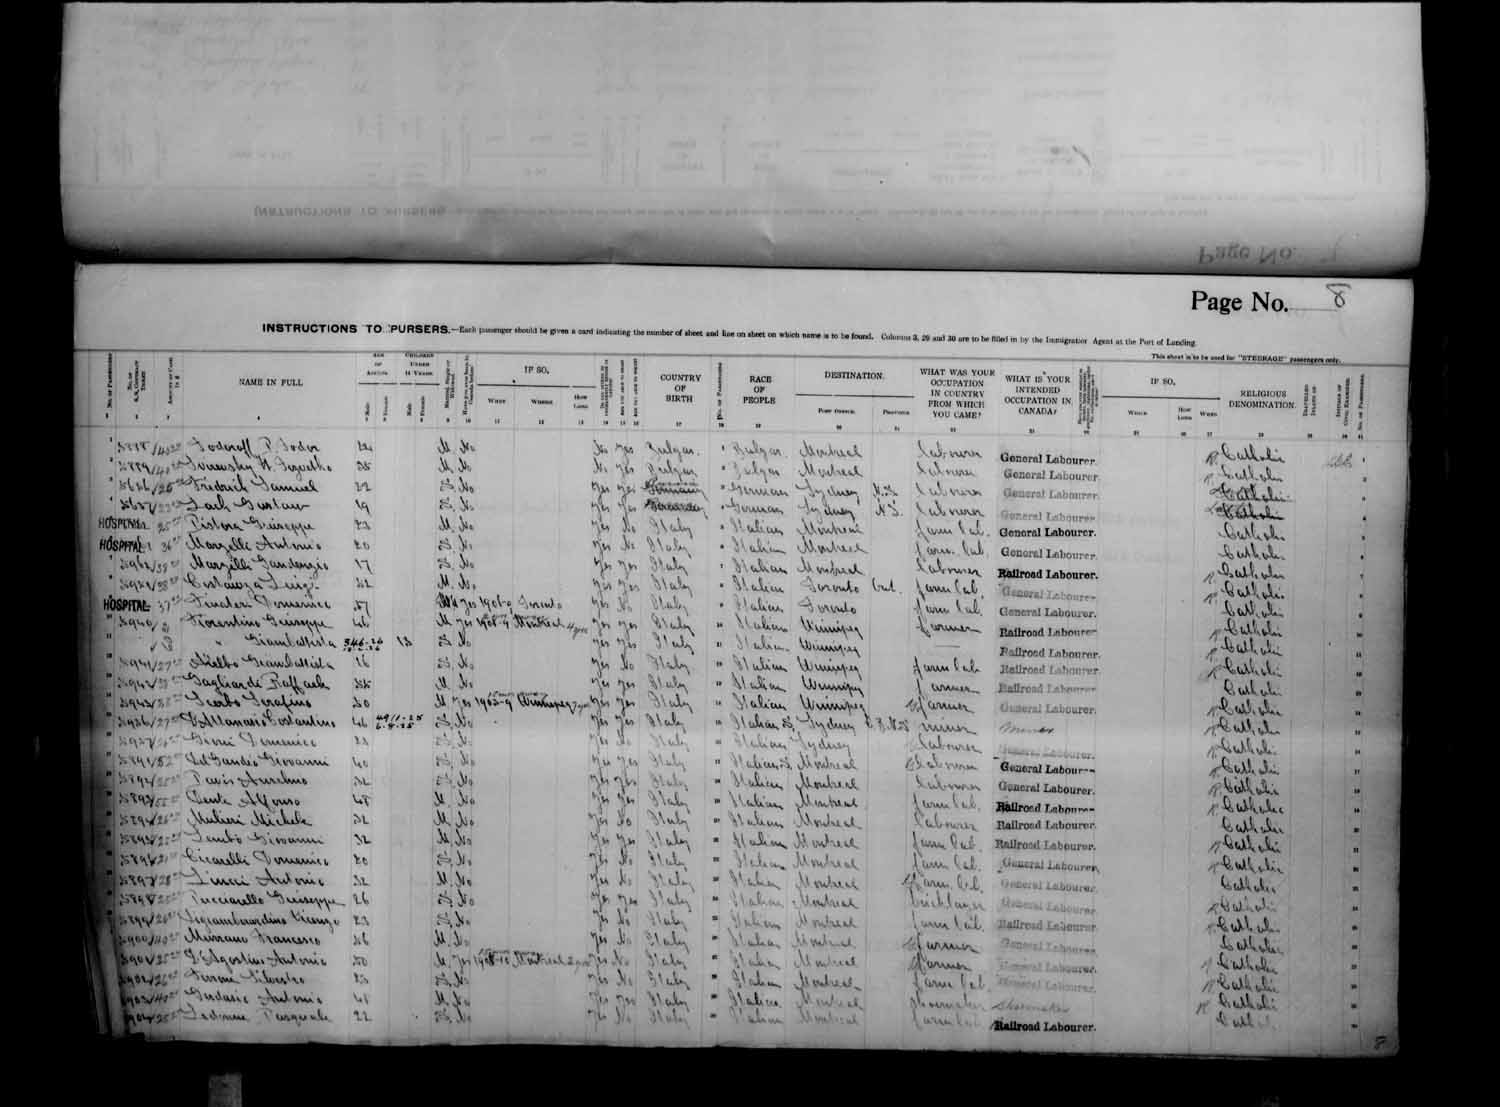 Digitized page of Passenger Lists for Image No.: e003686916